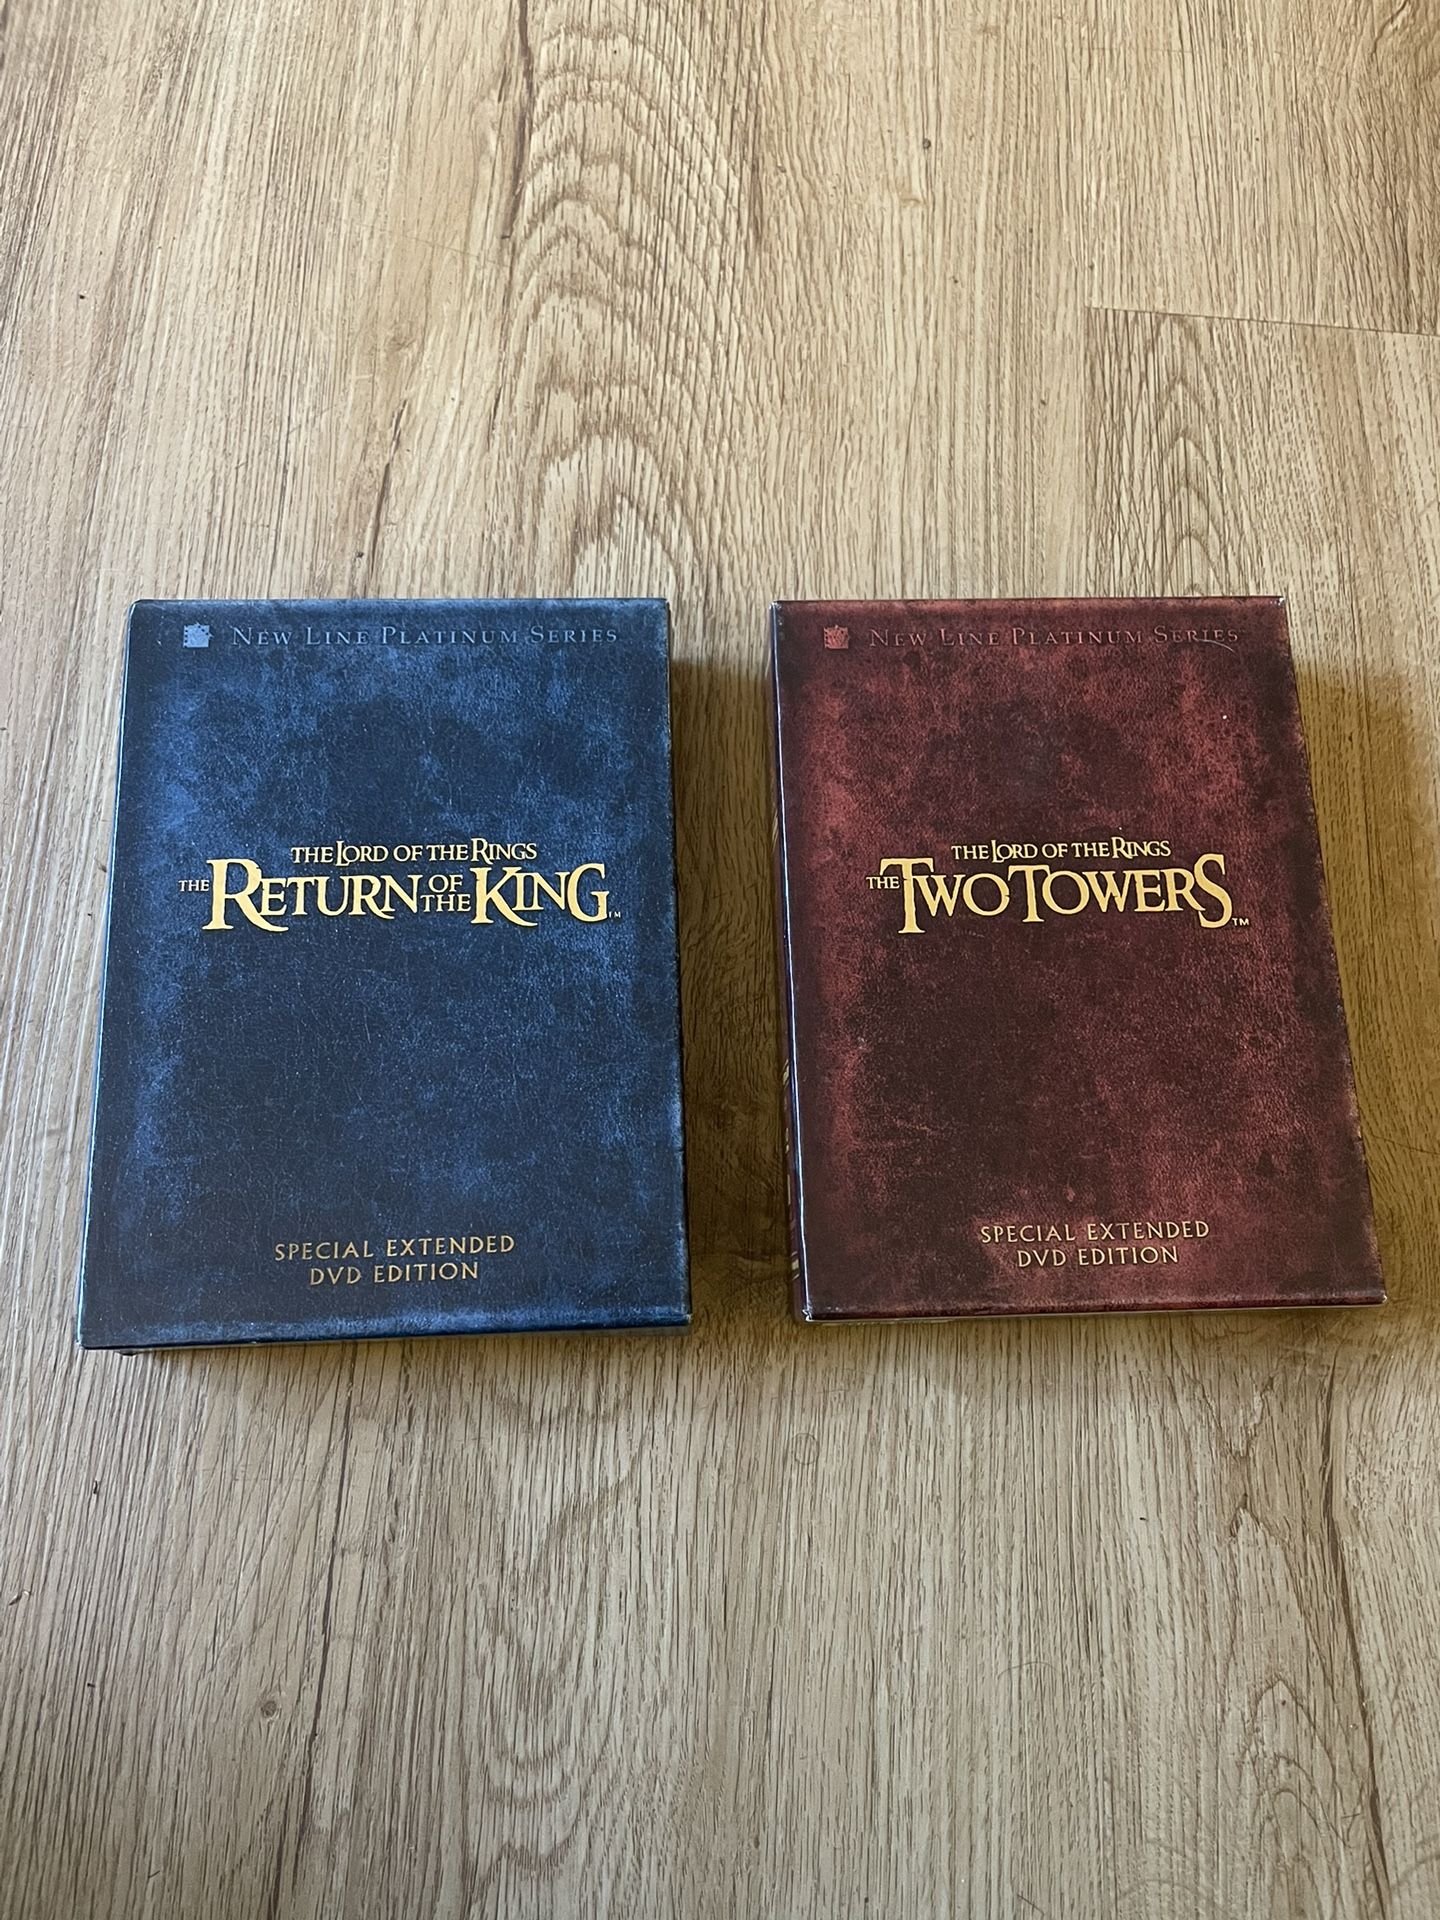 Lord Of The Ring DVD sets